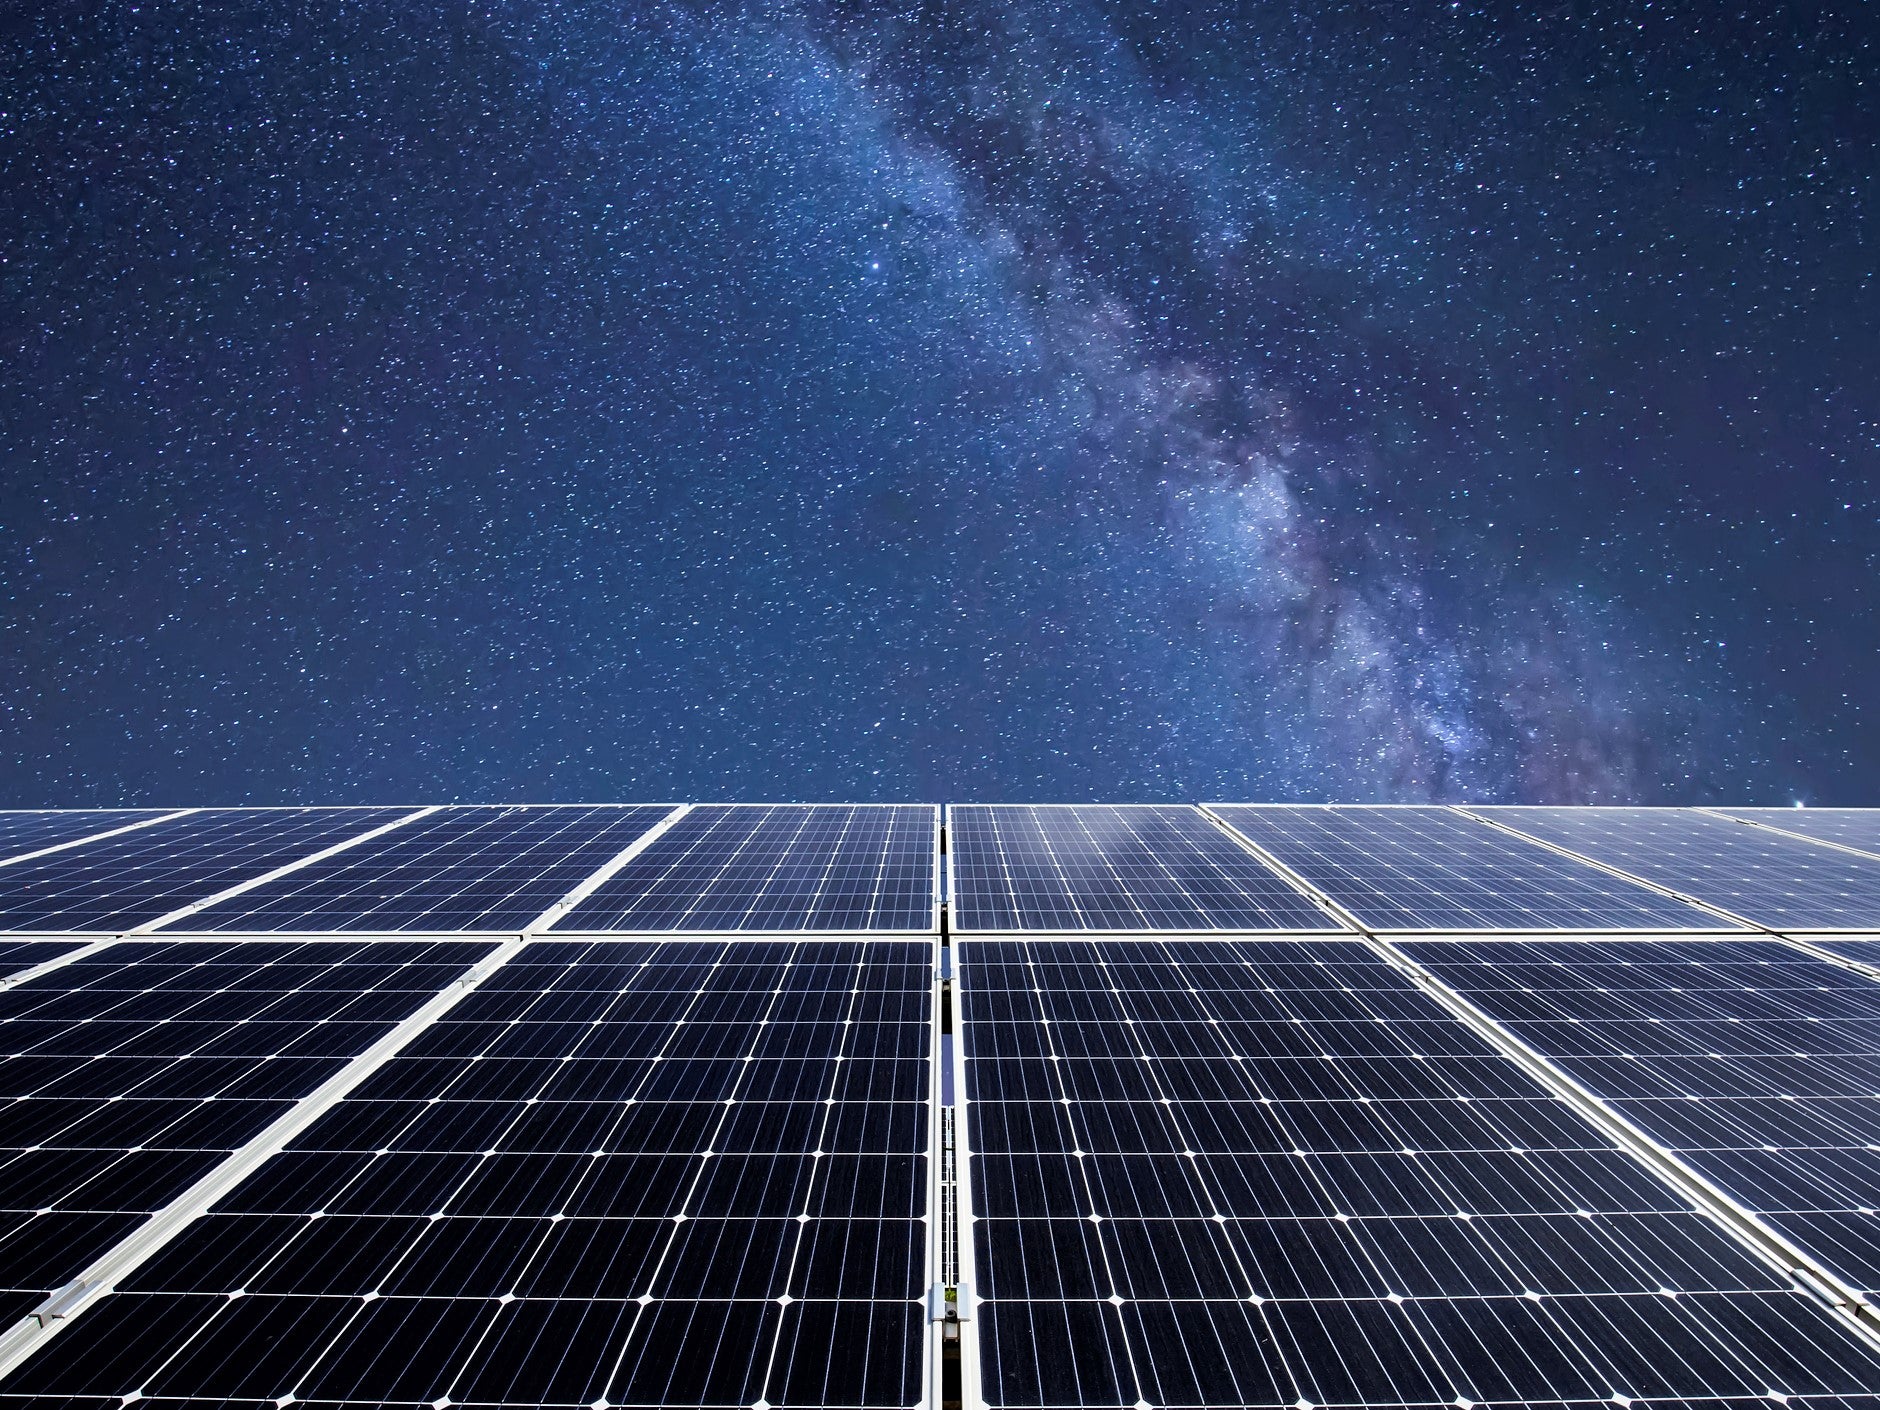 New solar panels can generate electricity at night if the skies are clear